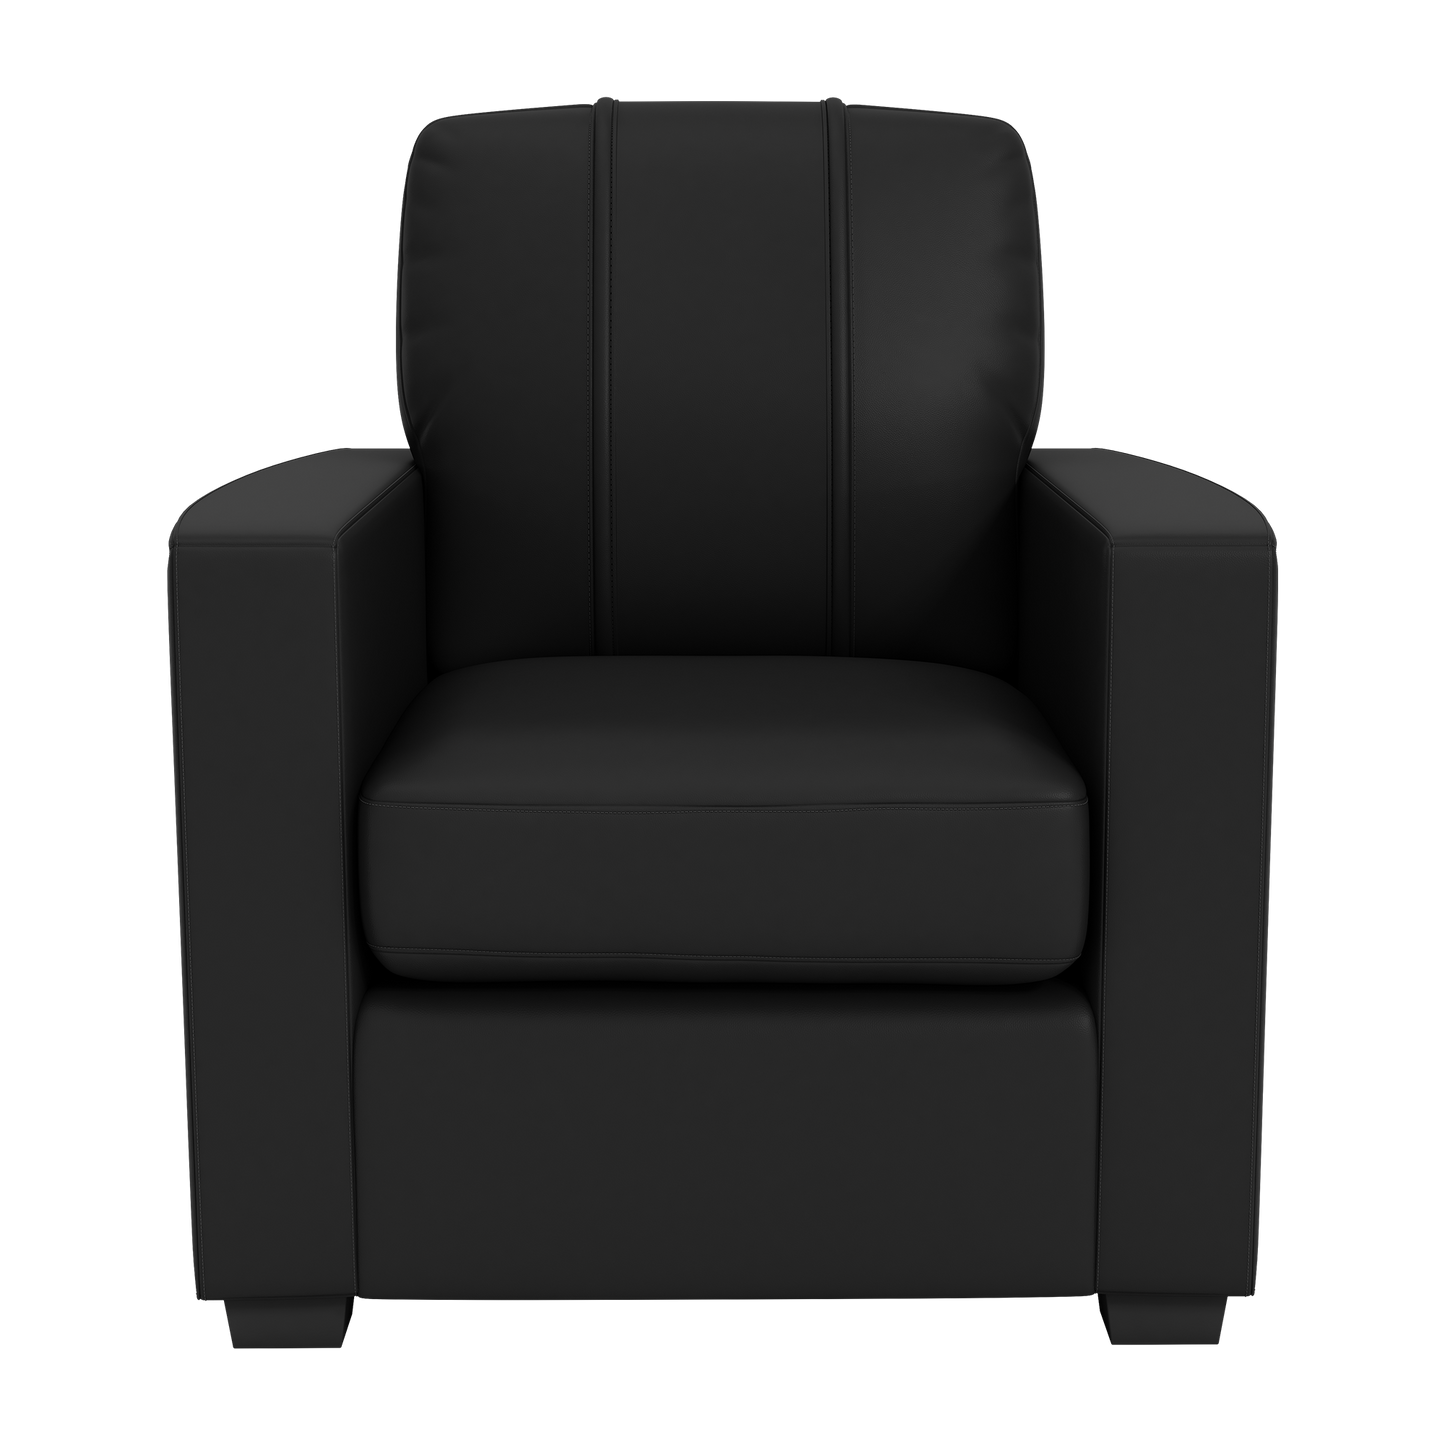 Silver Club Chair with  Tennessee Titans Helmet Logo